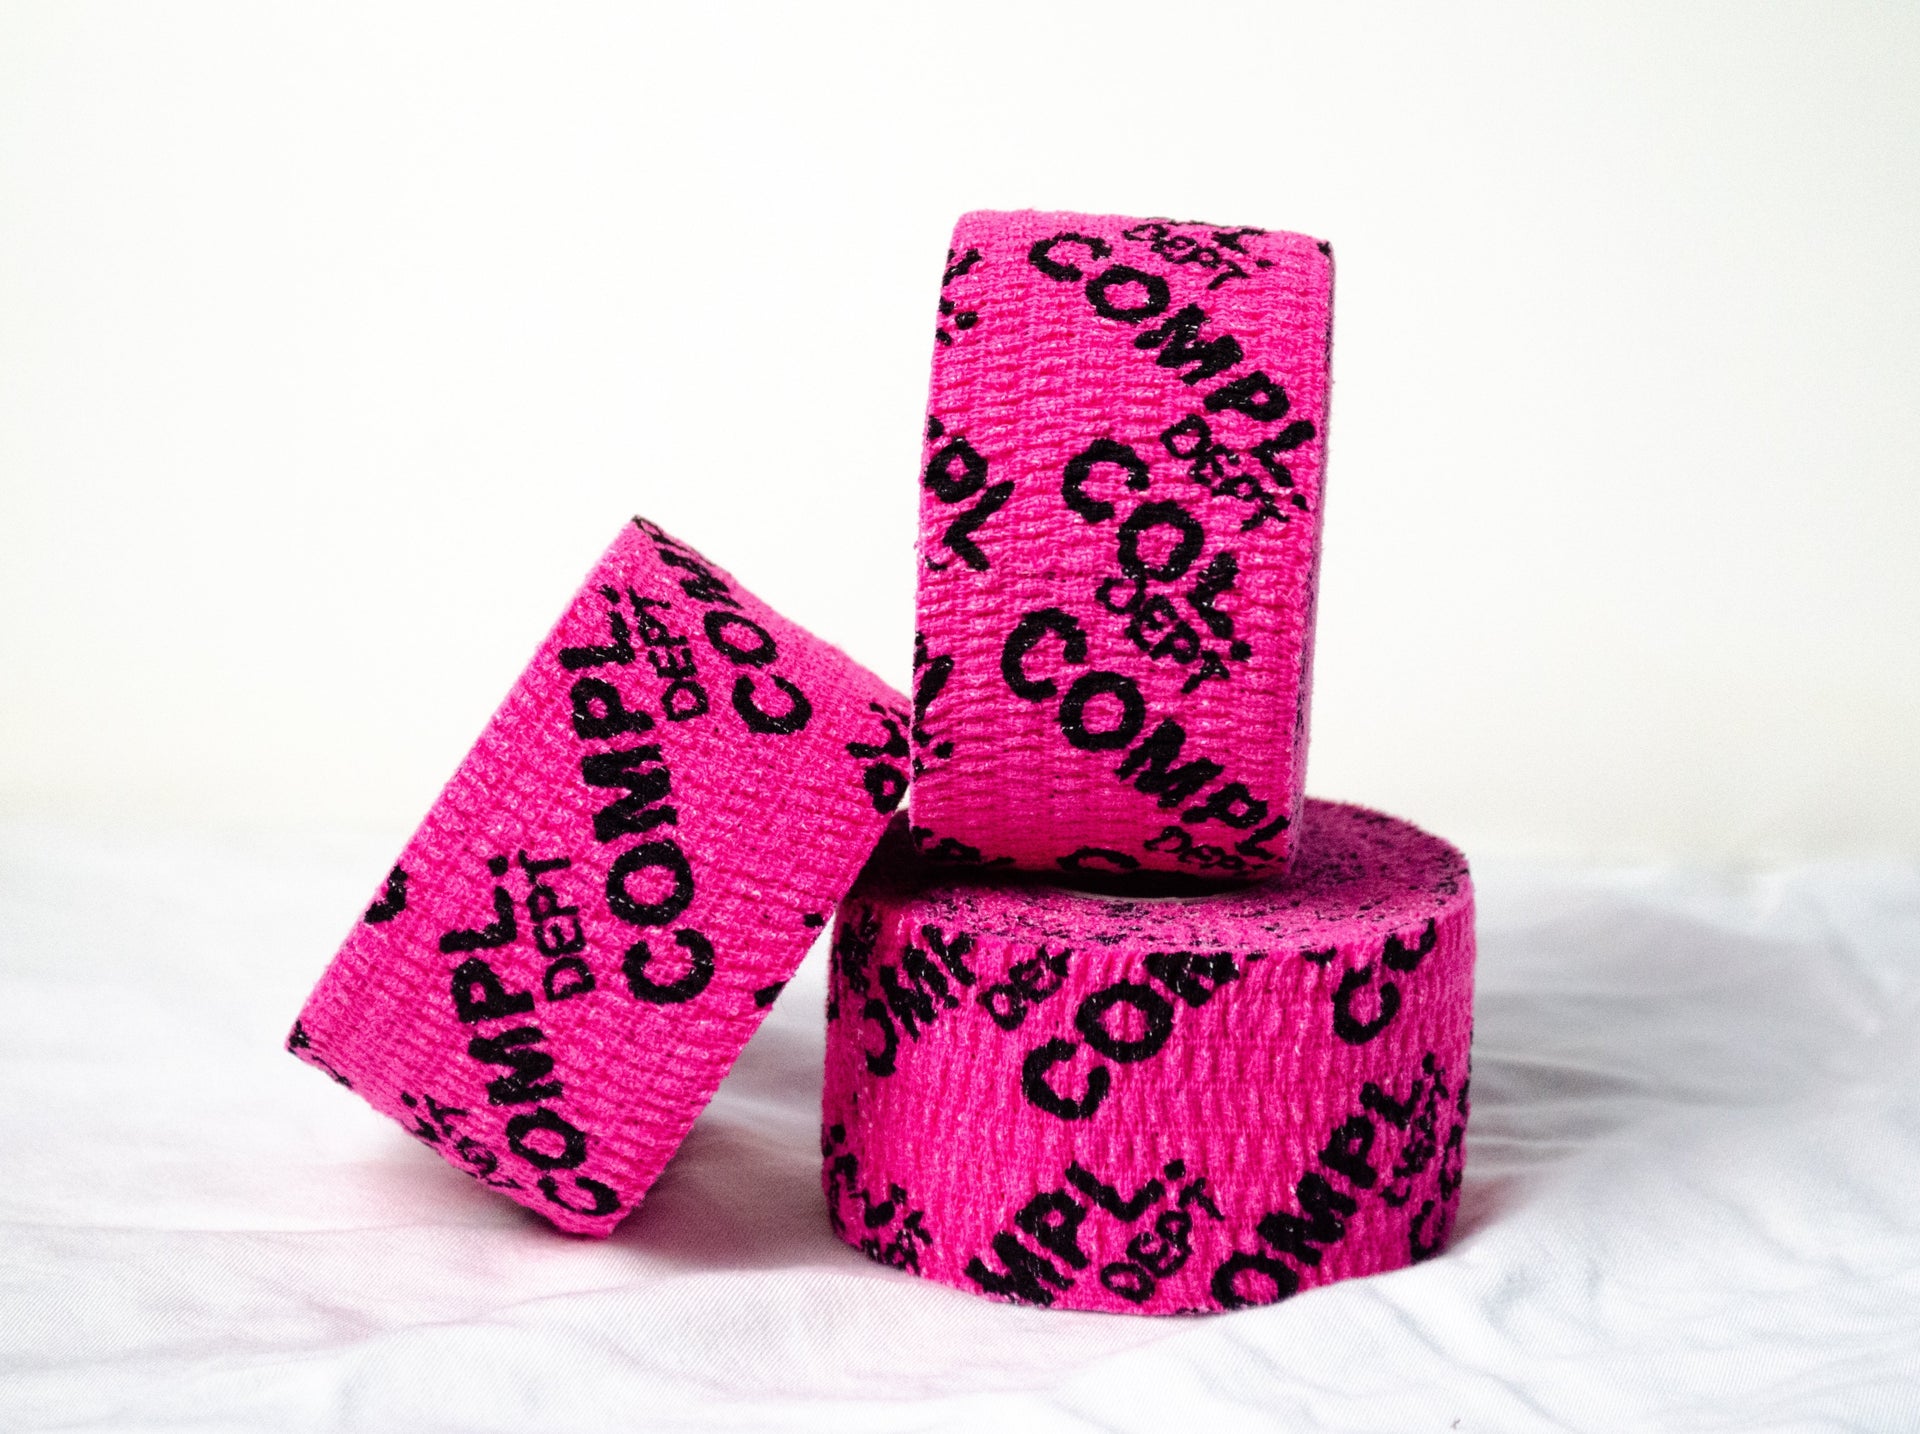 Hook Grip & Weightlifting Tape, Pink 3-pack - Unmatched Flexibility